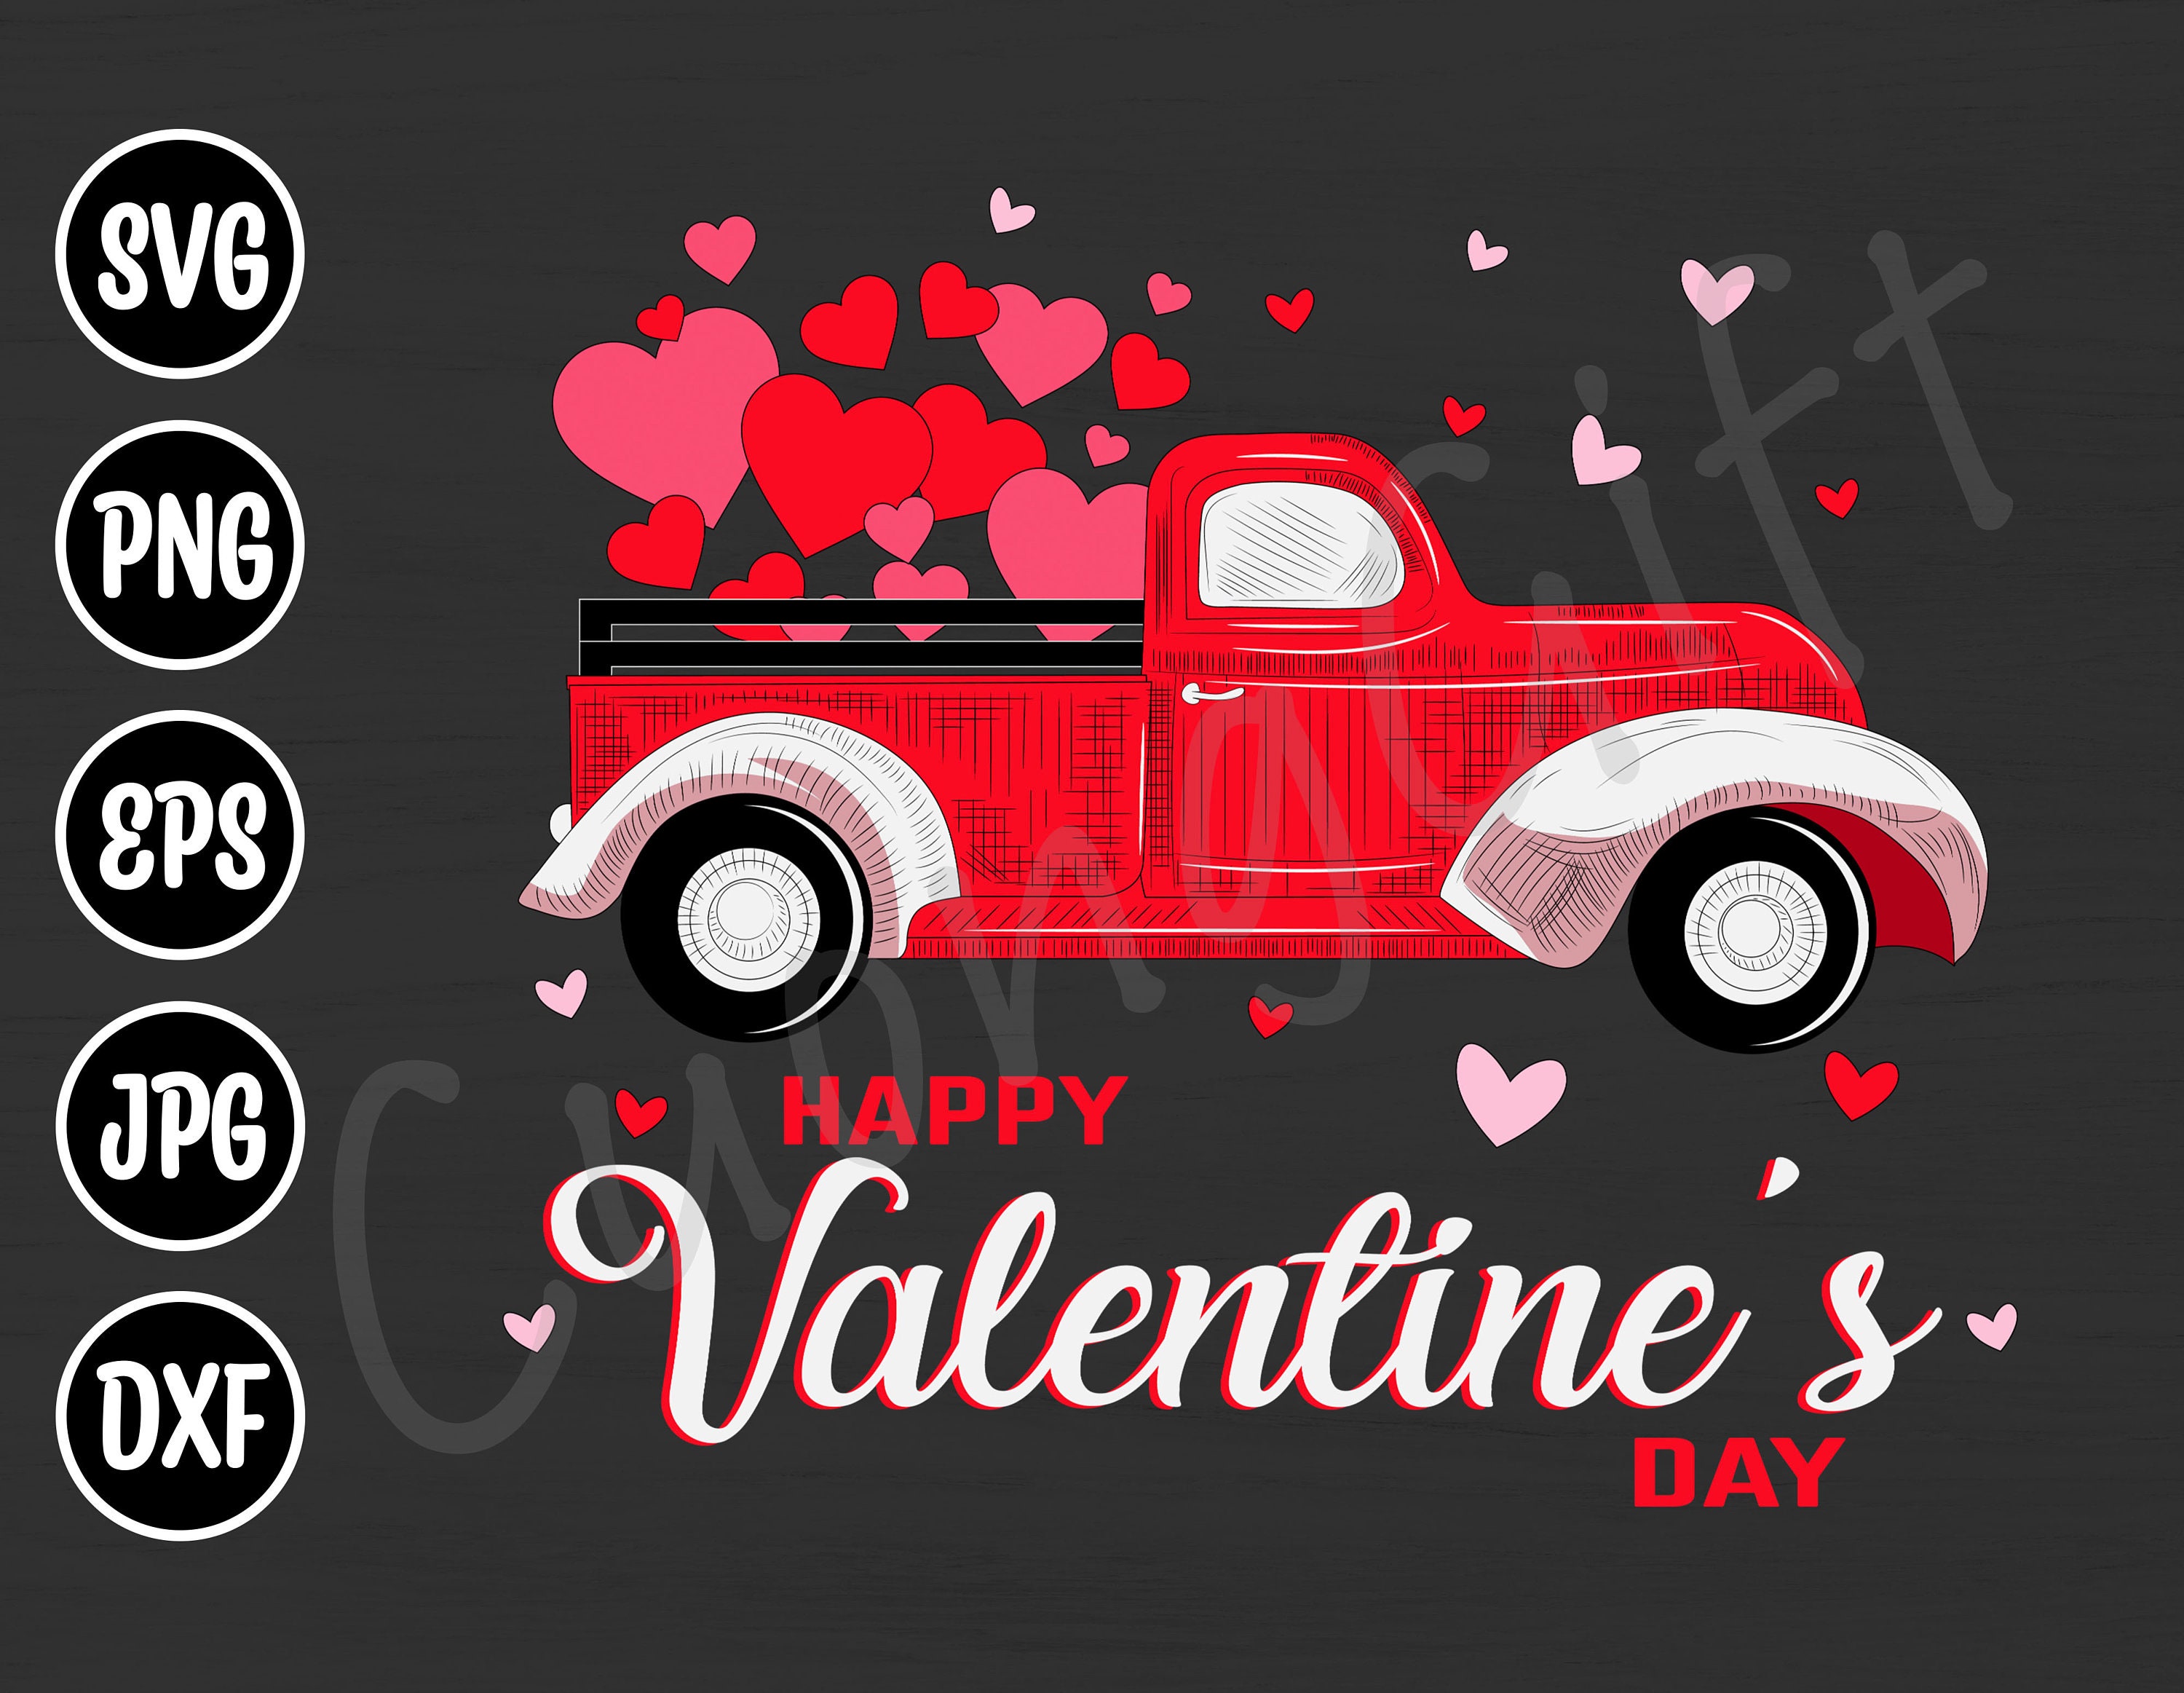 Happy Valentine's Day Red Truck with Hearts Sign w 7.75x15.625 in 